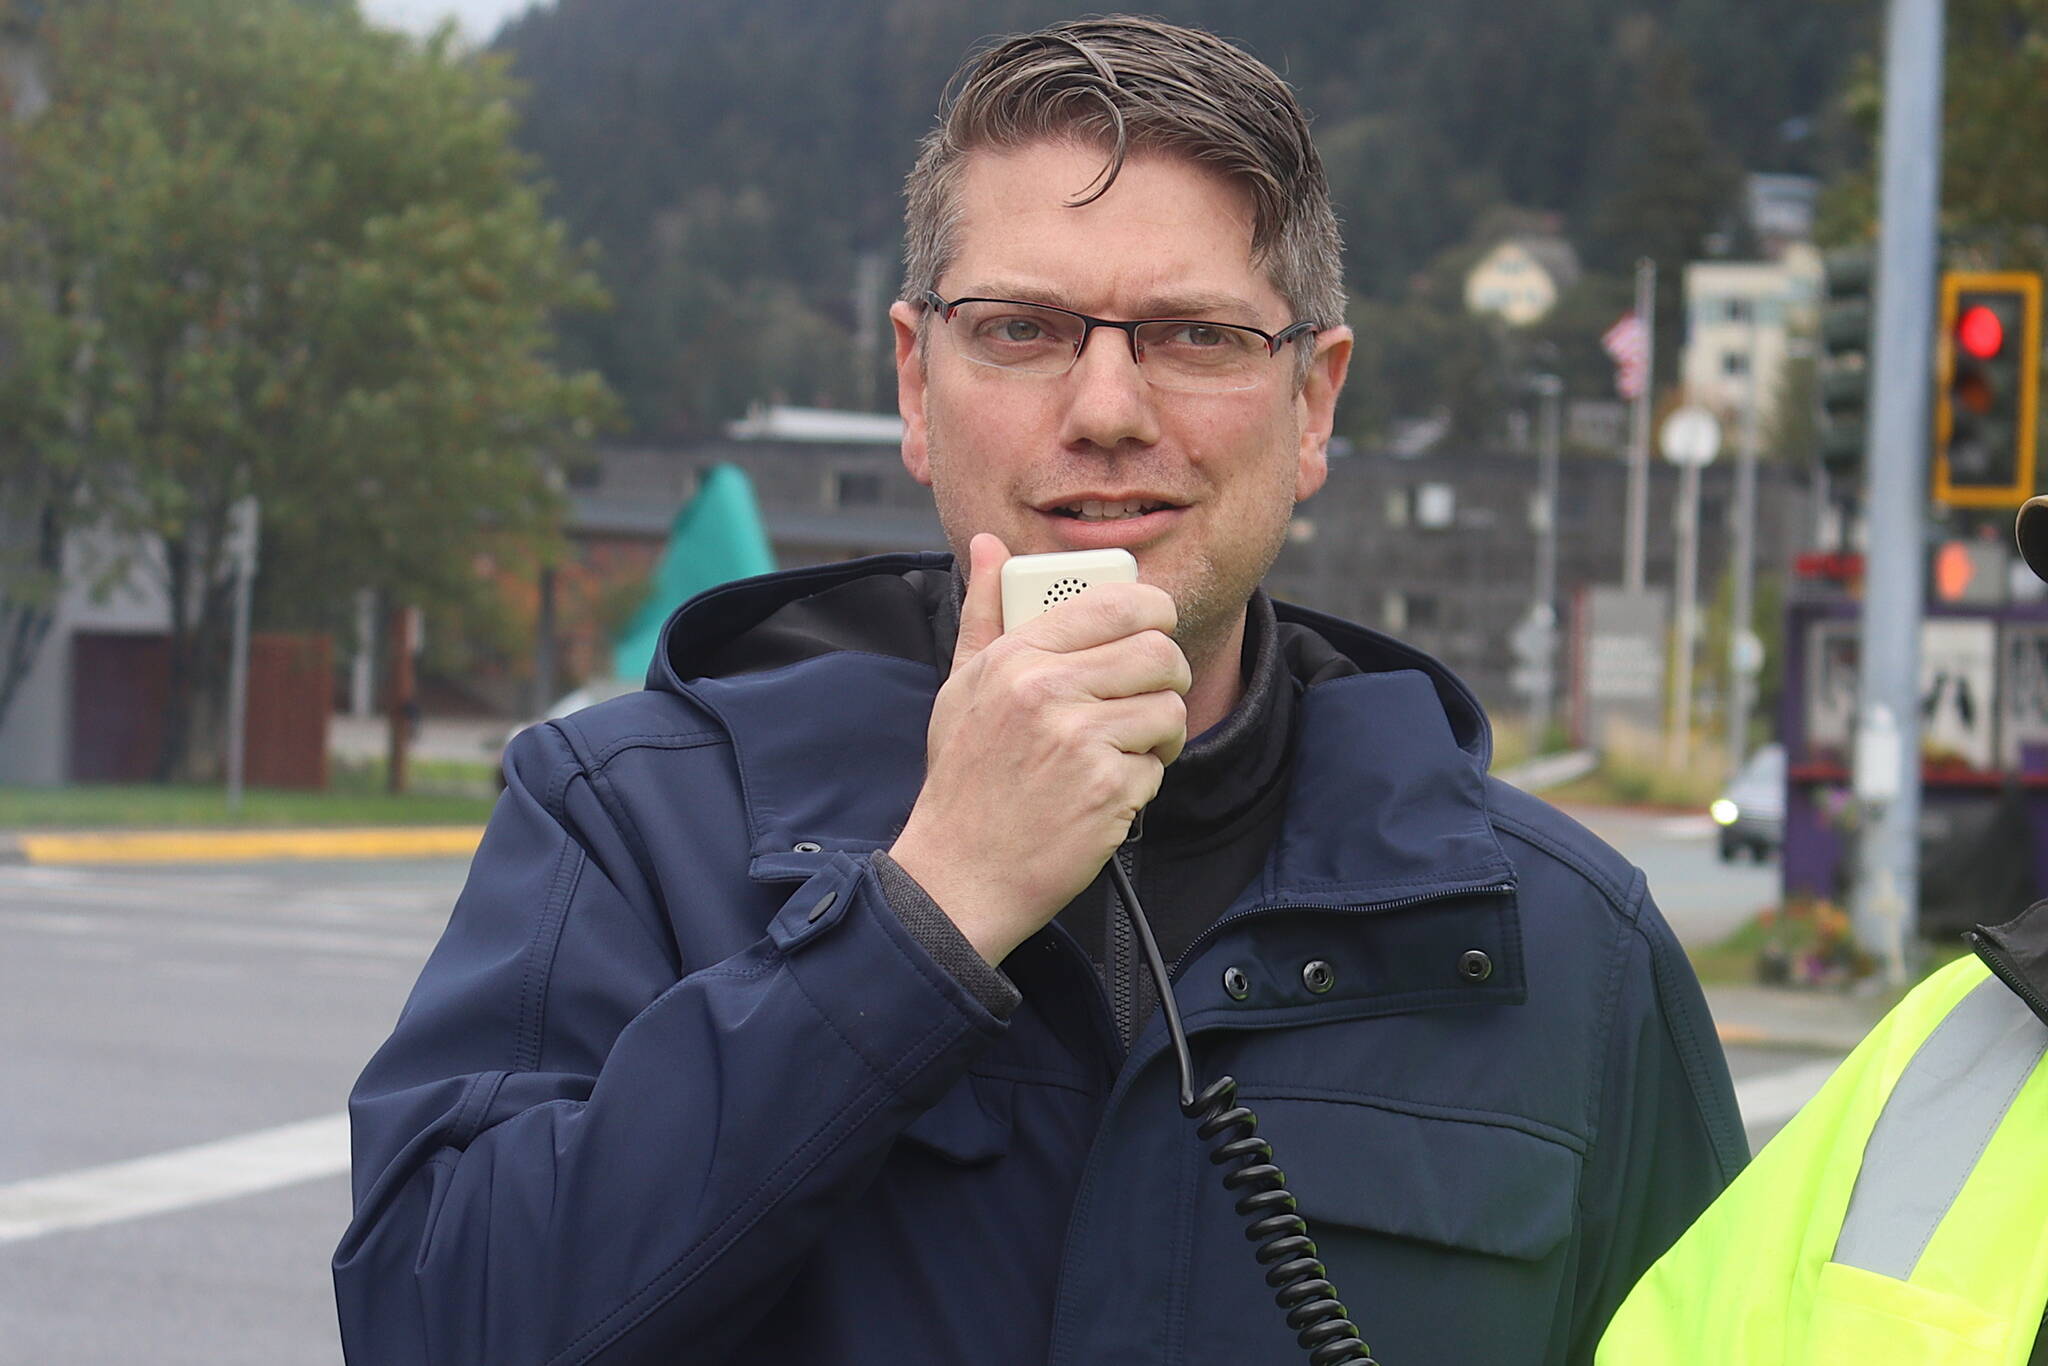 Nick Begich III, speaks to Juneau residents at a public gathering in September 2022. Begich on Thursday announced on social media that he will again be running for the Alaska U.S. House seat in the 2024 election. (Mark Sabbatini / Juneau Empire File).